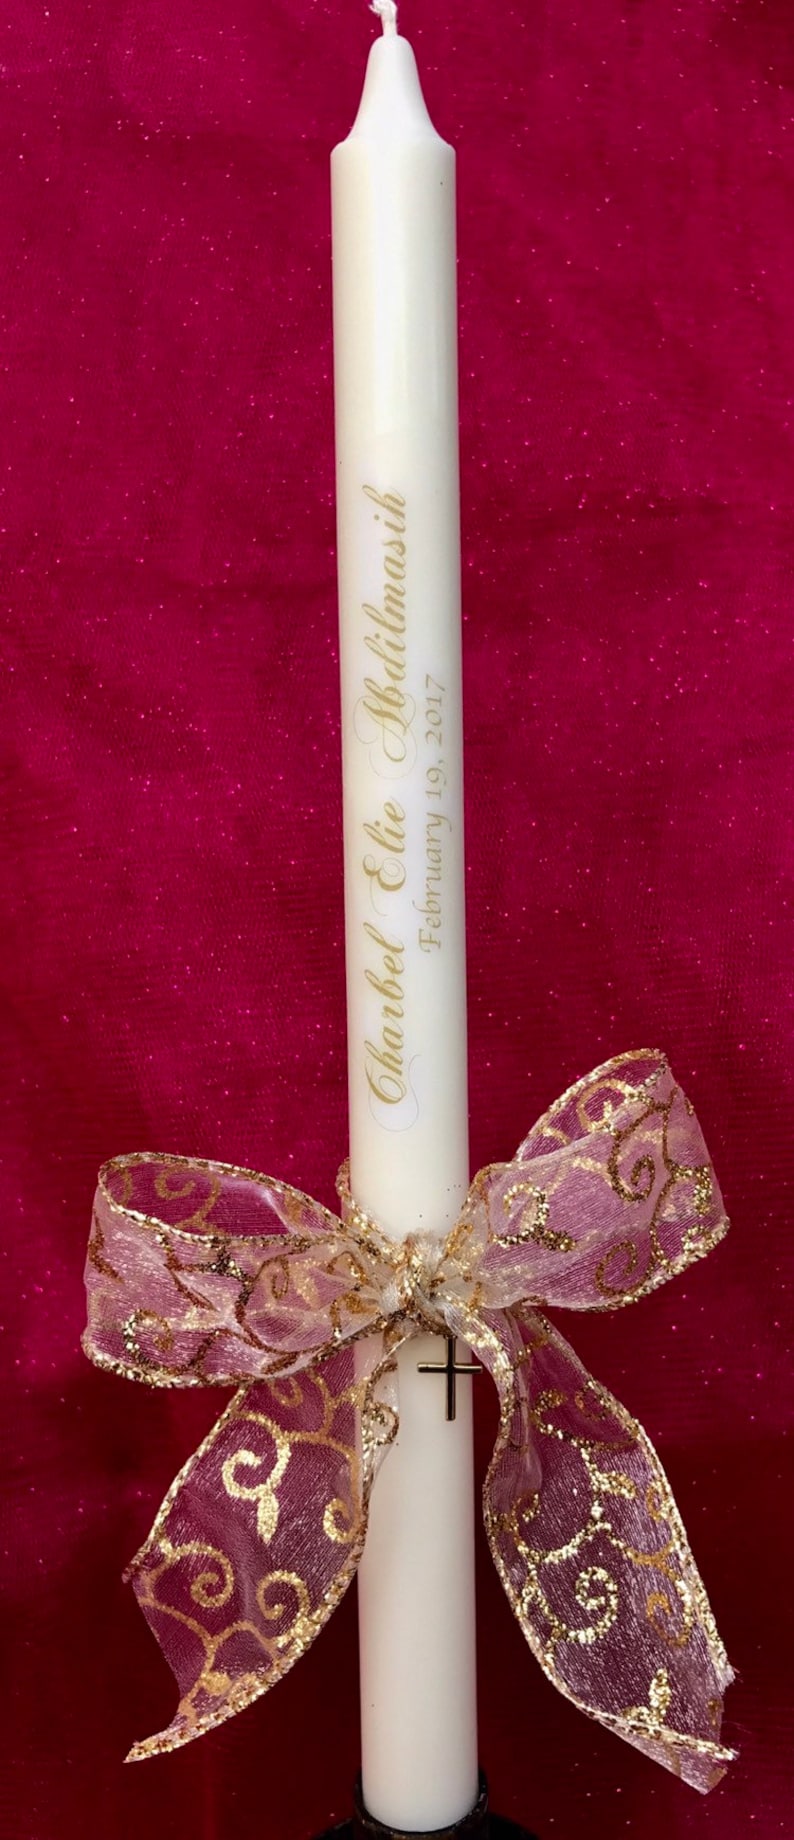 Personalized Baptismal Candles 10 inches 10 Personalized Ceremonial Baptism Candle with a bow, a charm. It's the perfect Baptism gift image 10